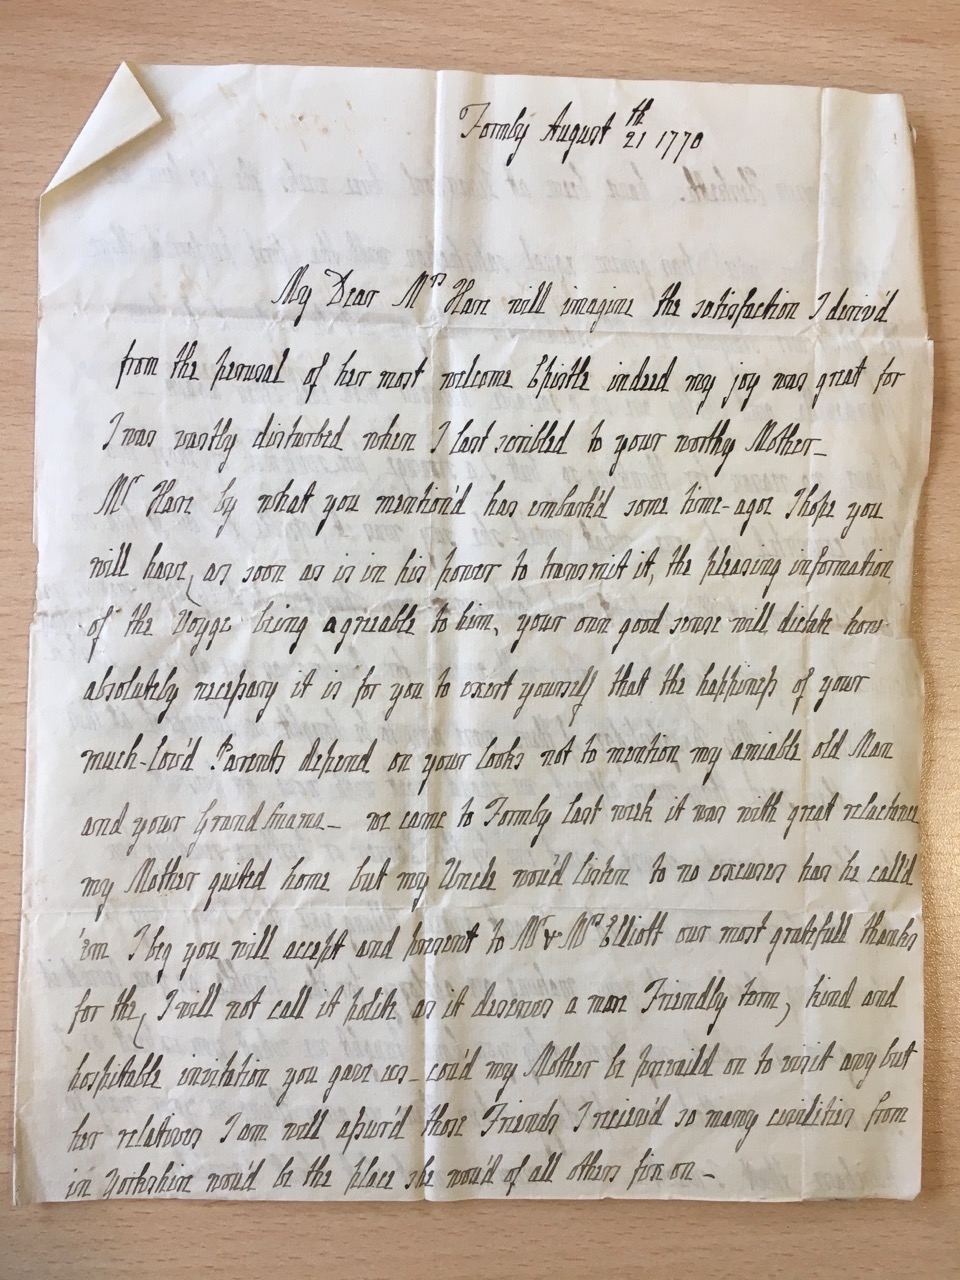 Image #3 of letter: J[enny] Brownsword to Ann Hare, 21 August 1770